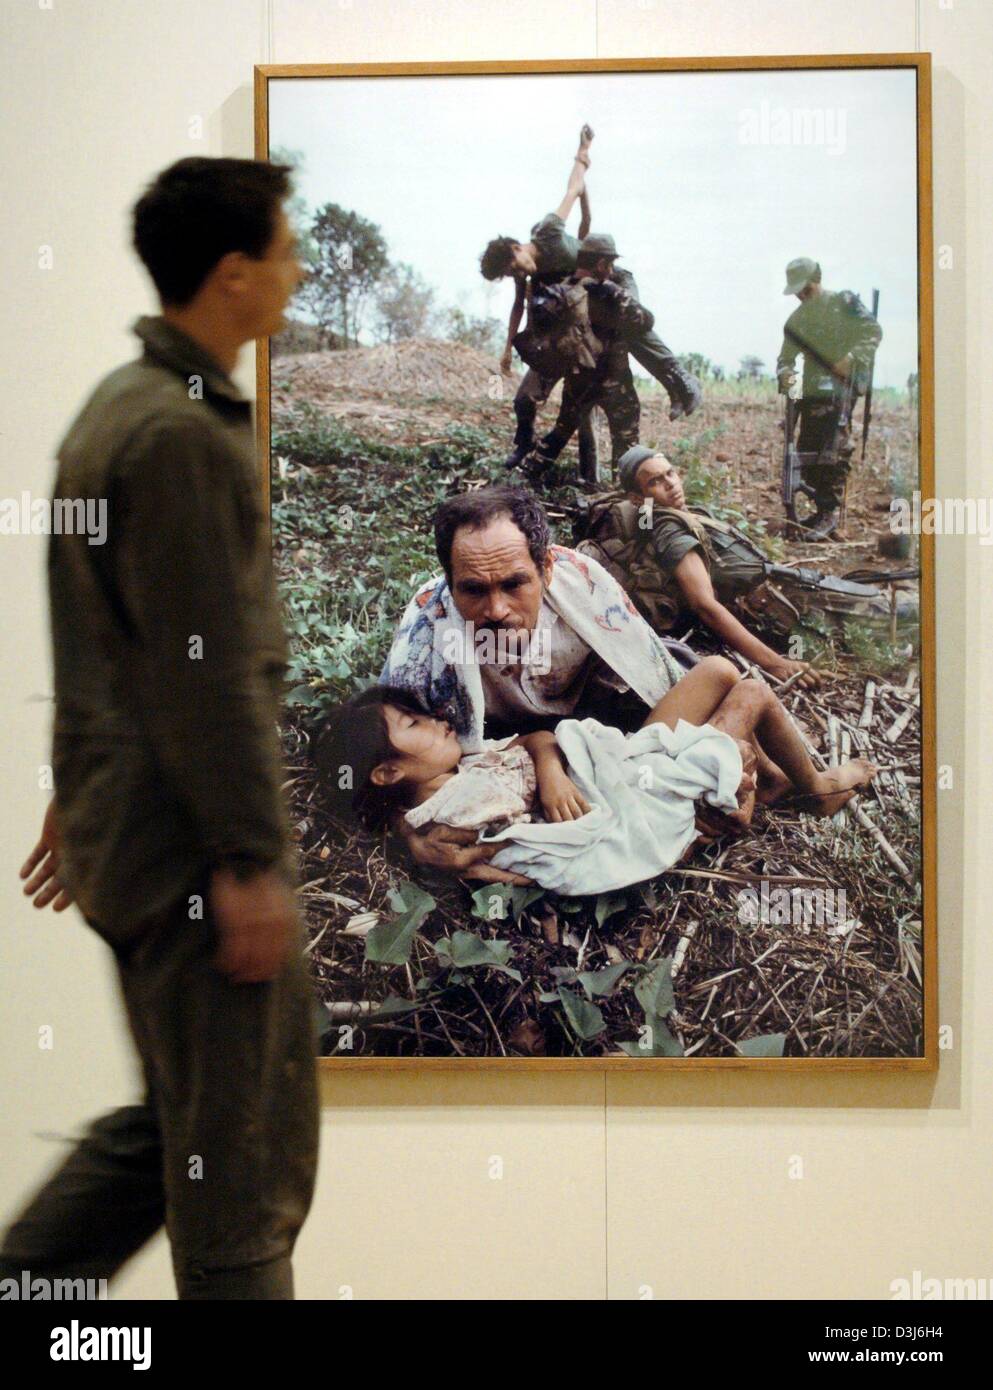 (dpa) - A visitor walks past a photograph by US photographer James Nachtwey at the art gallery of the Sparkasse in Leipzig, Germany, 6 May 2004. The exhibition features 132 photographs of this year's winner of the media prize and runs from 7 May to 30 May 2004. Nachtwey has been working as a photographer for the past 20 years covering war and misery throughout the world. Stock Photo